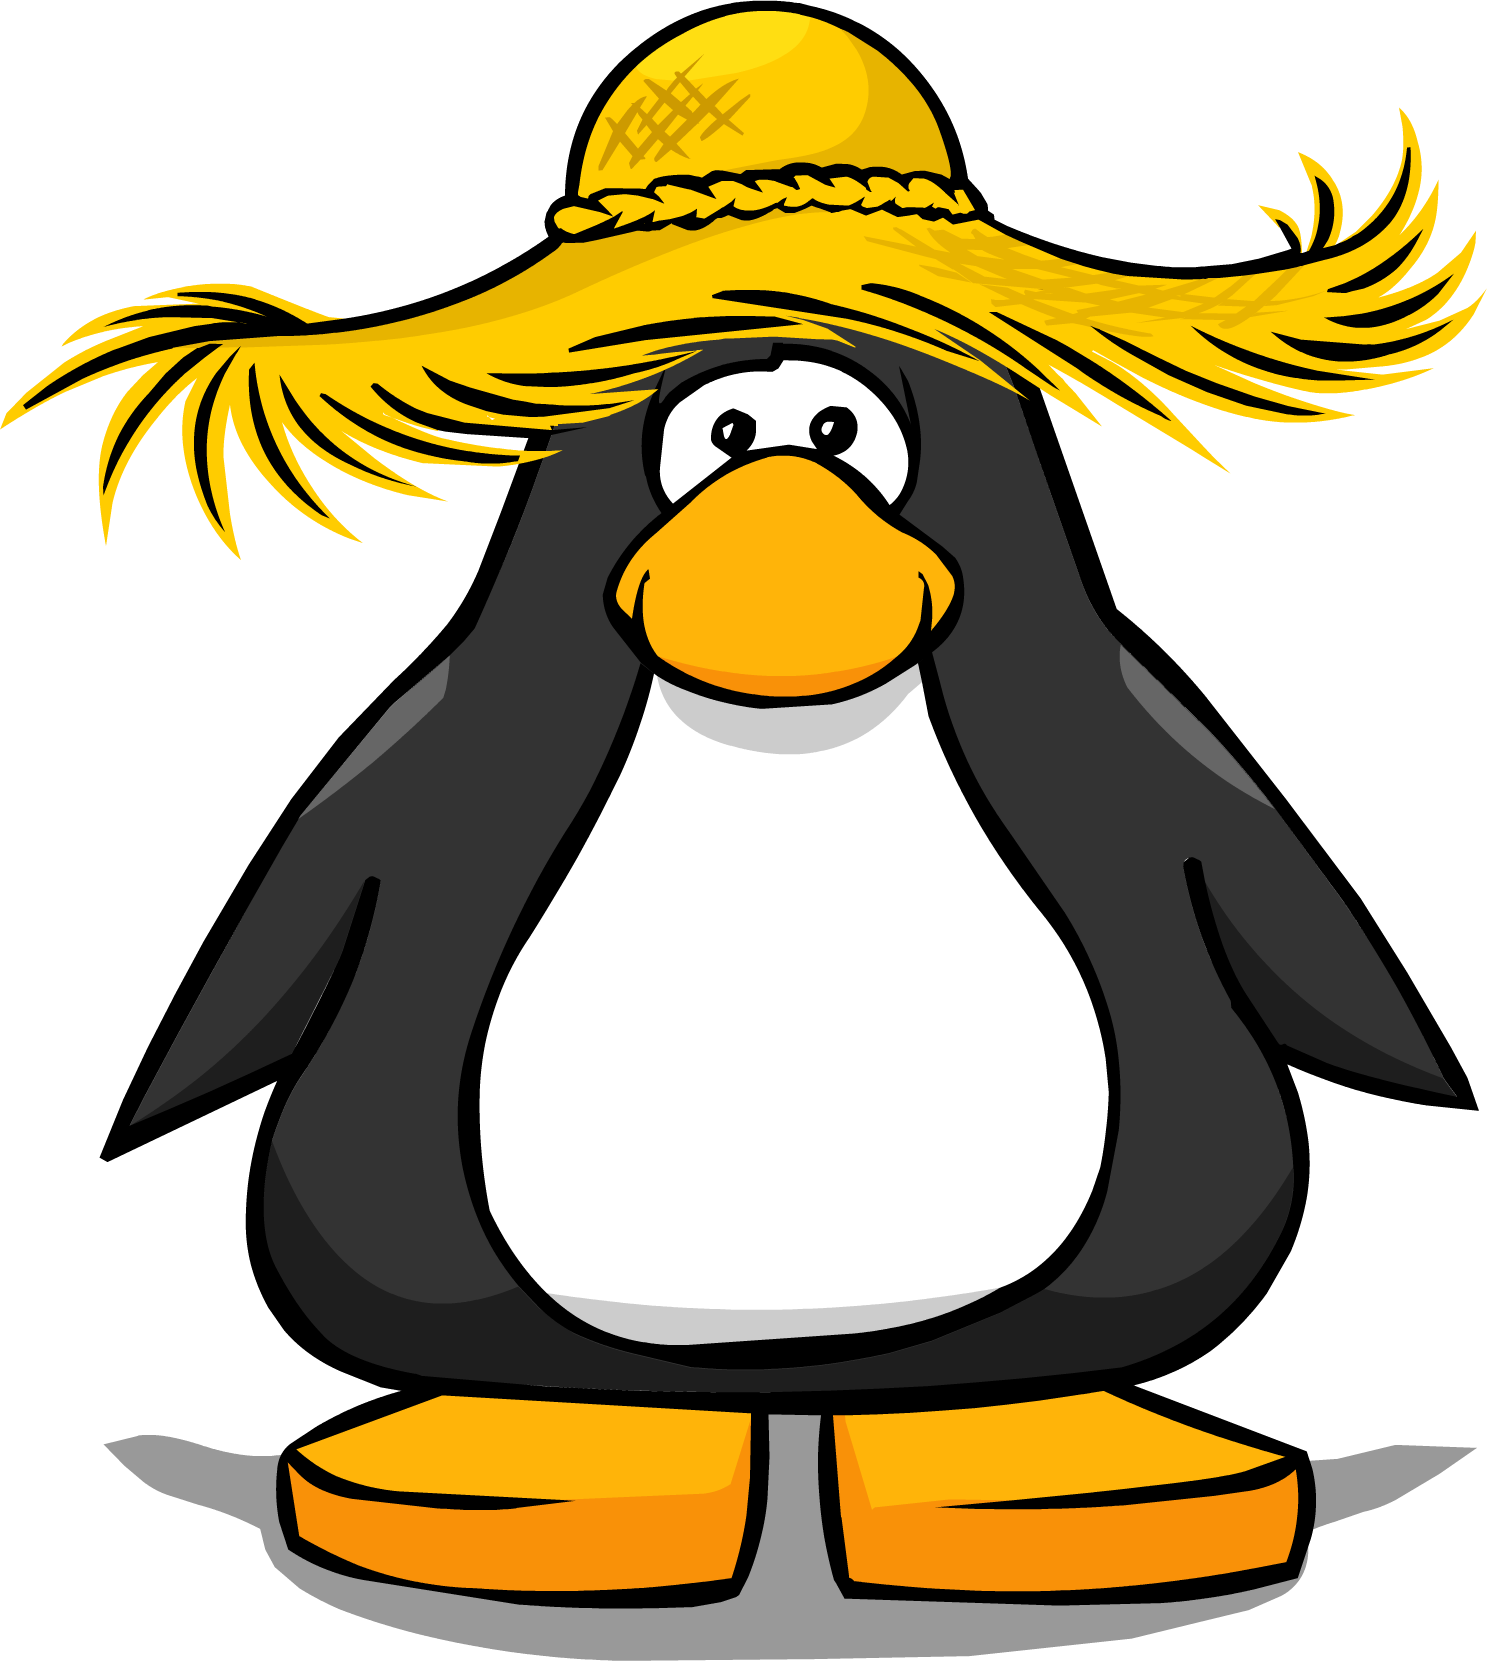 Straw Hat Pc - Club Penguin Bling Bling Necklace (1487x1661)